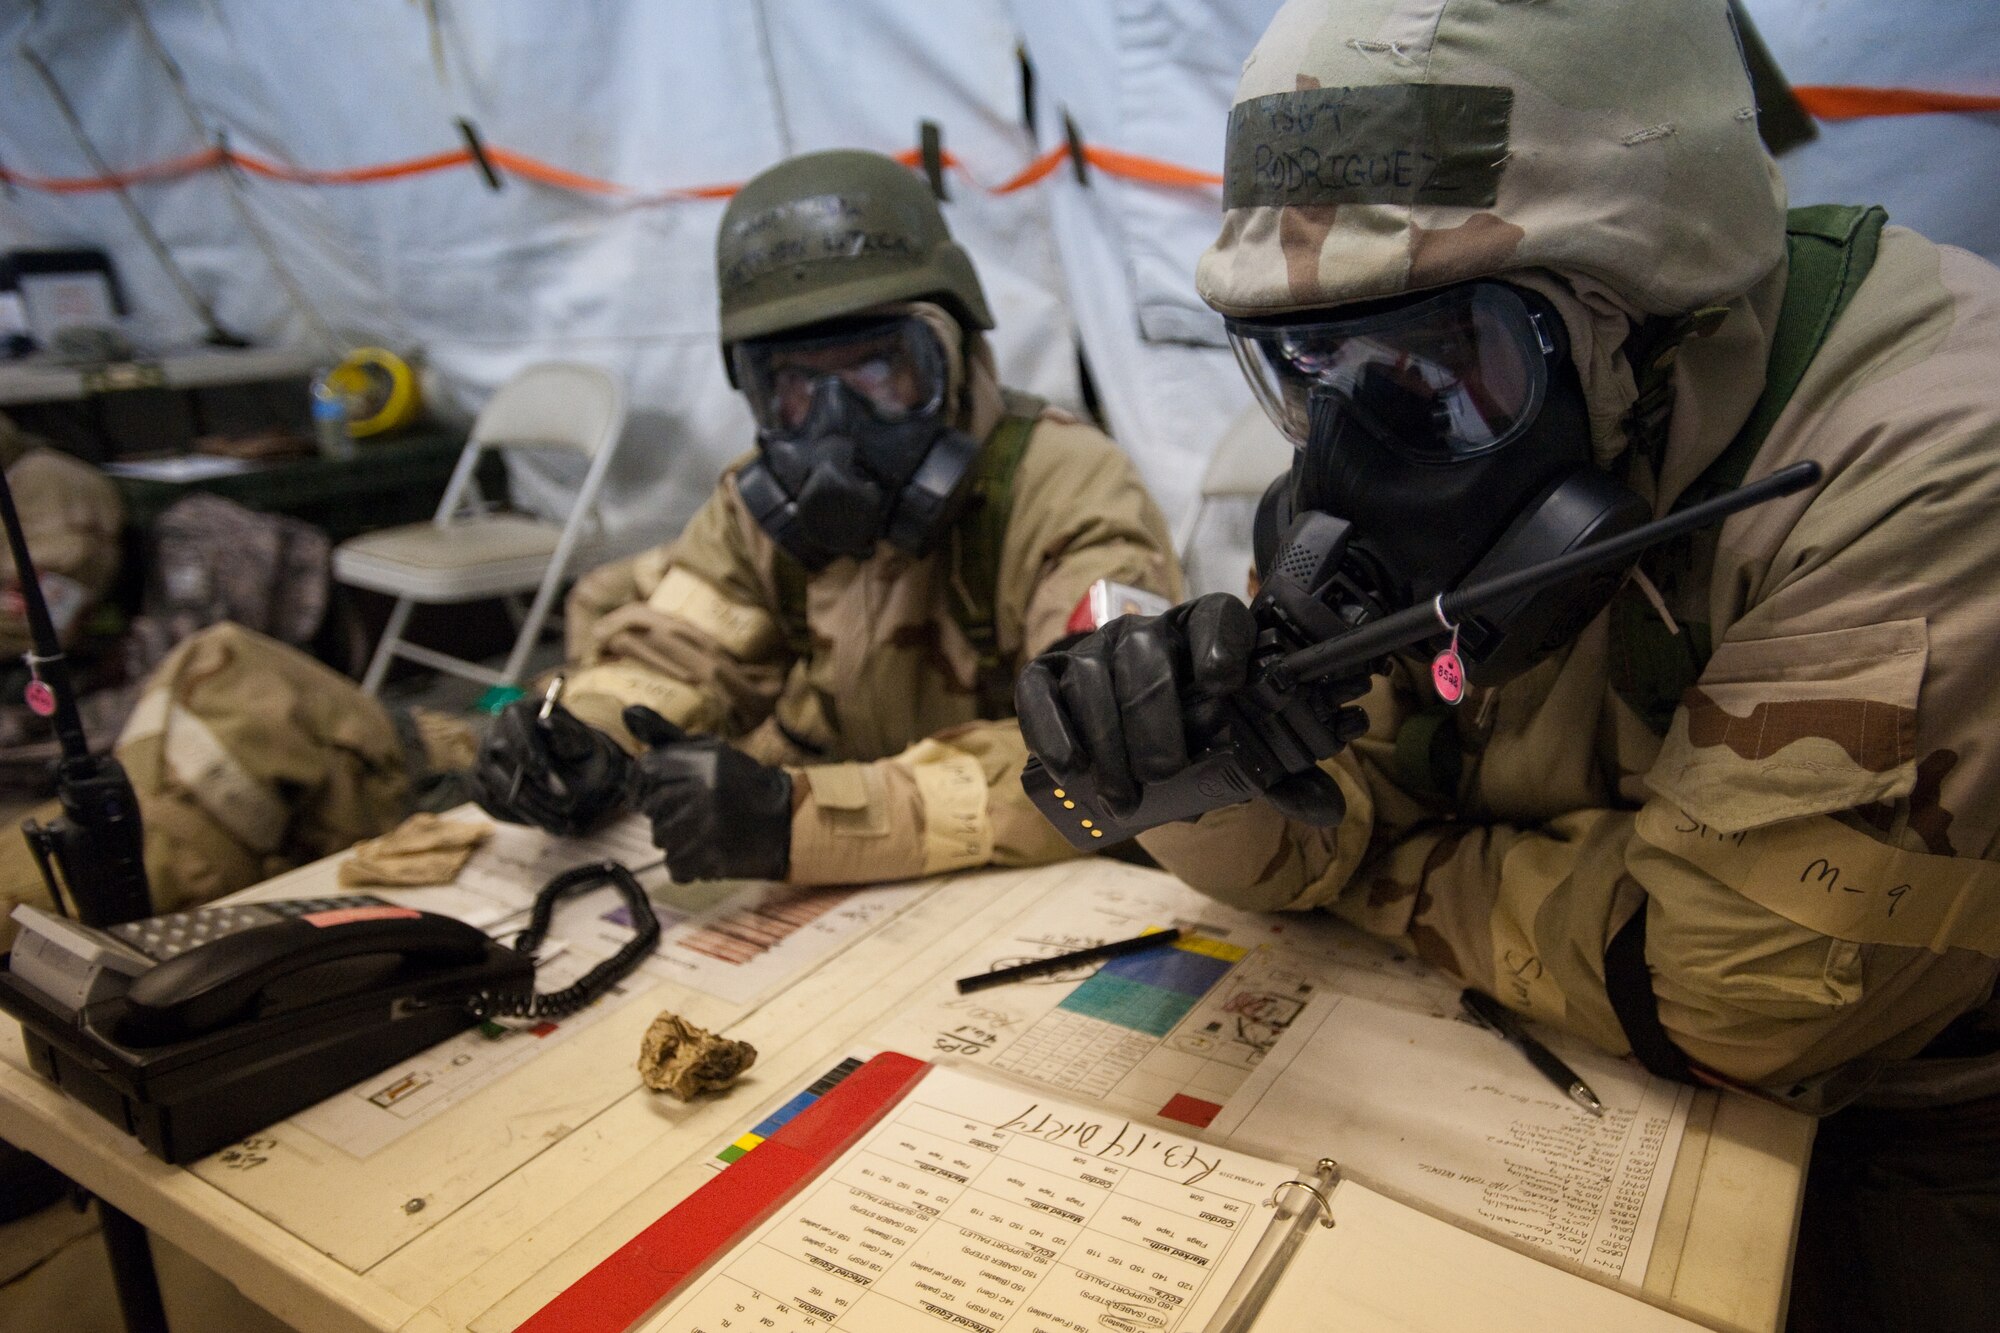 U.S. Air Force Tech. Sgt. John Rodriguez (right), from the 245th Air Traffic Control Squadron of the South Carolina Air National Guard, coordinates post-attack procedures during a Readiness Exercise at McEntire Joint National Guard Base, S.C., May 4, 2013.  His unit is simulating being attacked with chemical agents. The 245th ATCS is conducting the readiness exercise in preparation for their unit readiness inspection. This exercise will test their ability to deploy, survive and operate in a chemical, biological, radioactive, and nuclear environment. (U.S. Air National Guard photo by Staff Sgt. Jorge Intriago/Released)